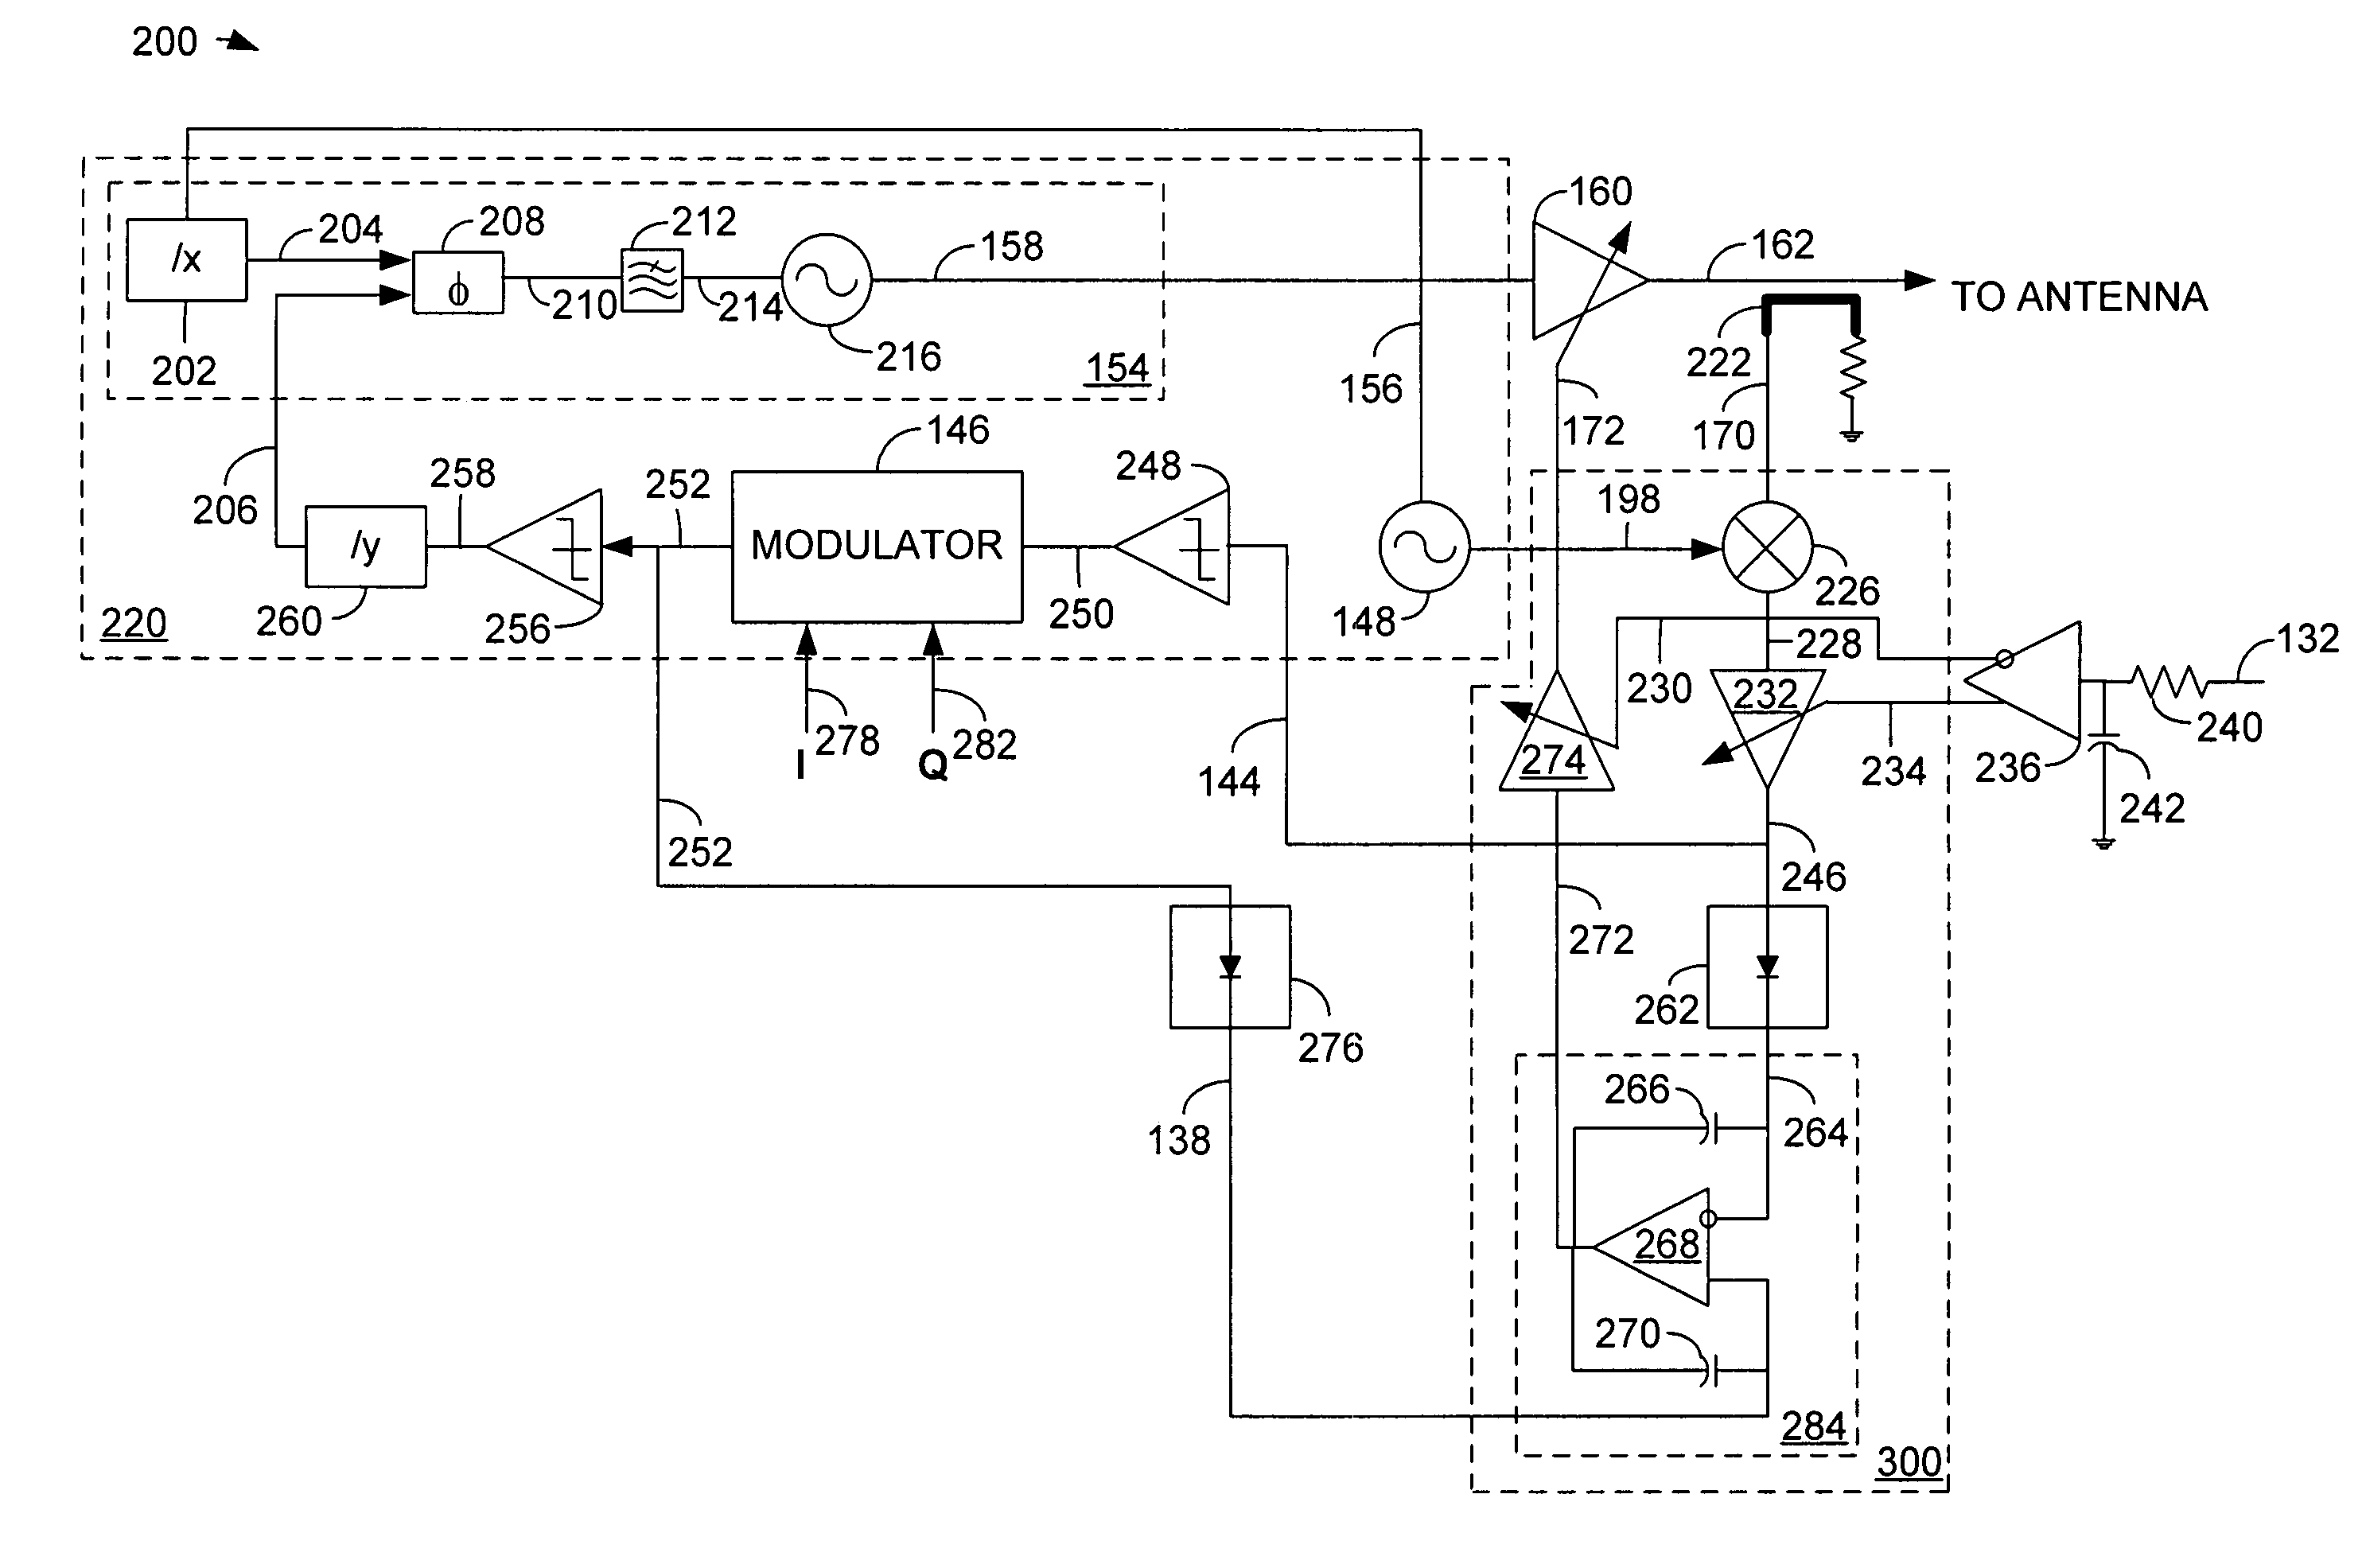 Continuous closed-loop power control system including modulation injection in a wireless transceiver power amplifier